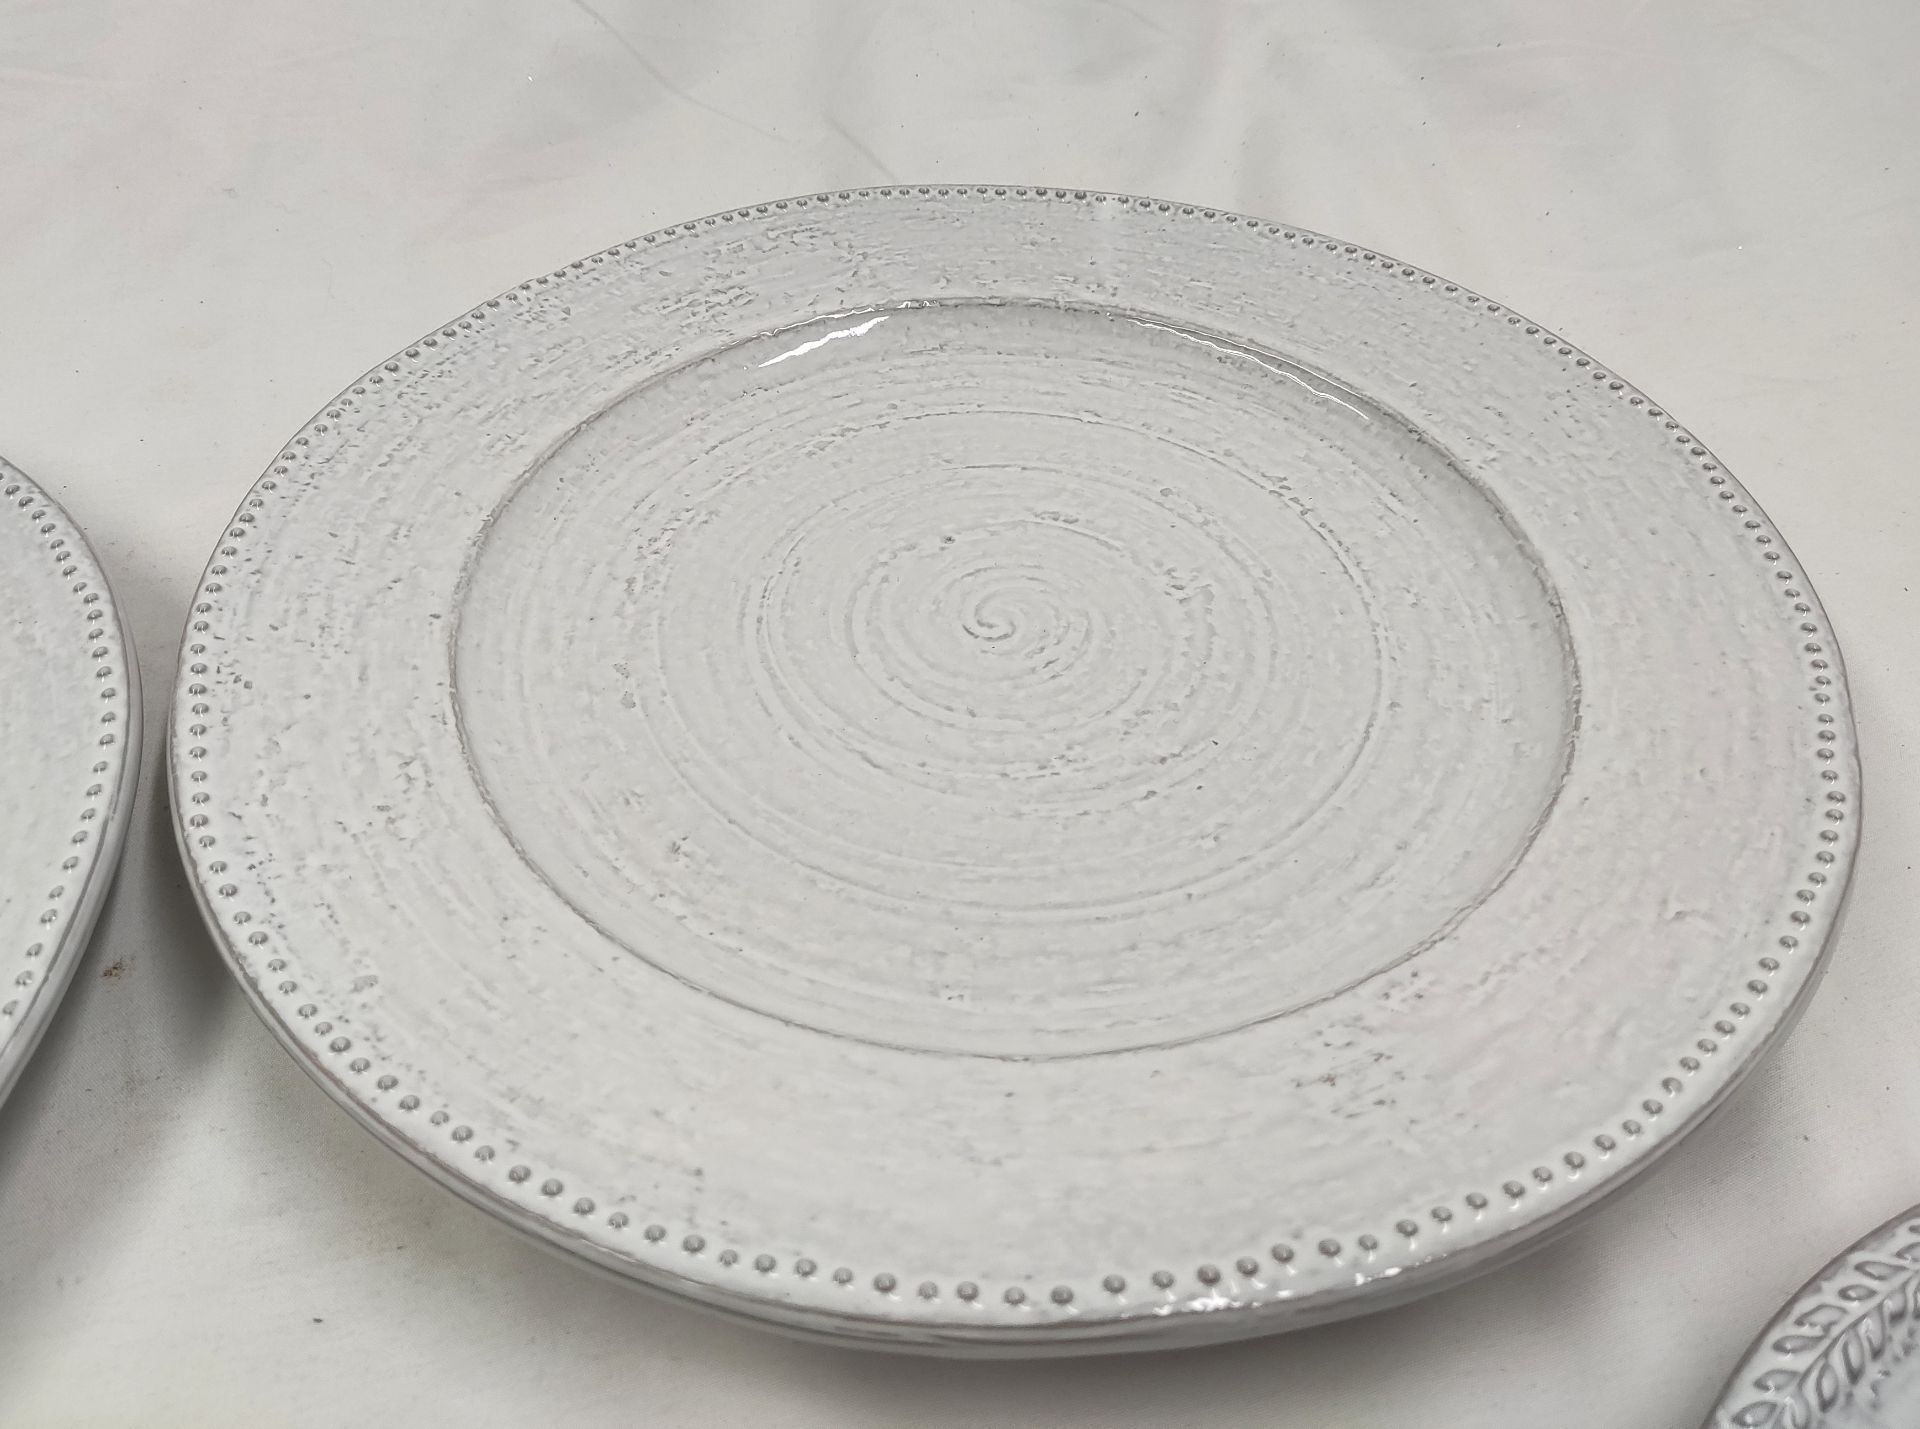 1 x SOHO HOME Set Of Hillcrest Plates - 2 X Side Plate And 2 X Dinner Plate - New/Unused - RRP £ - Image 6 of 12